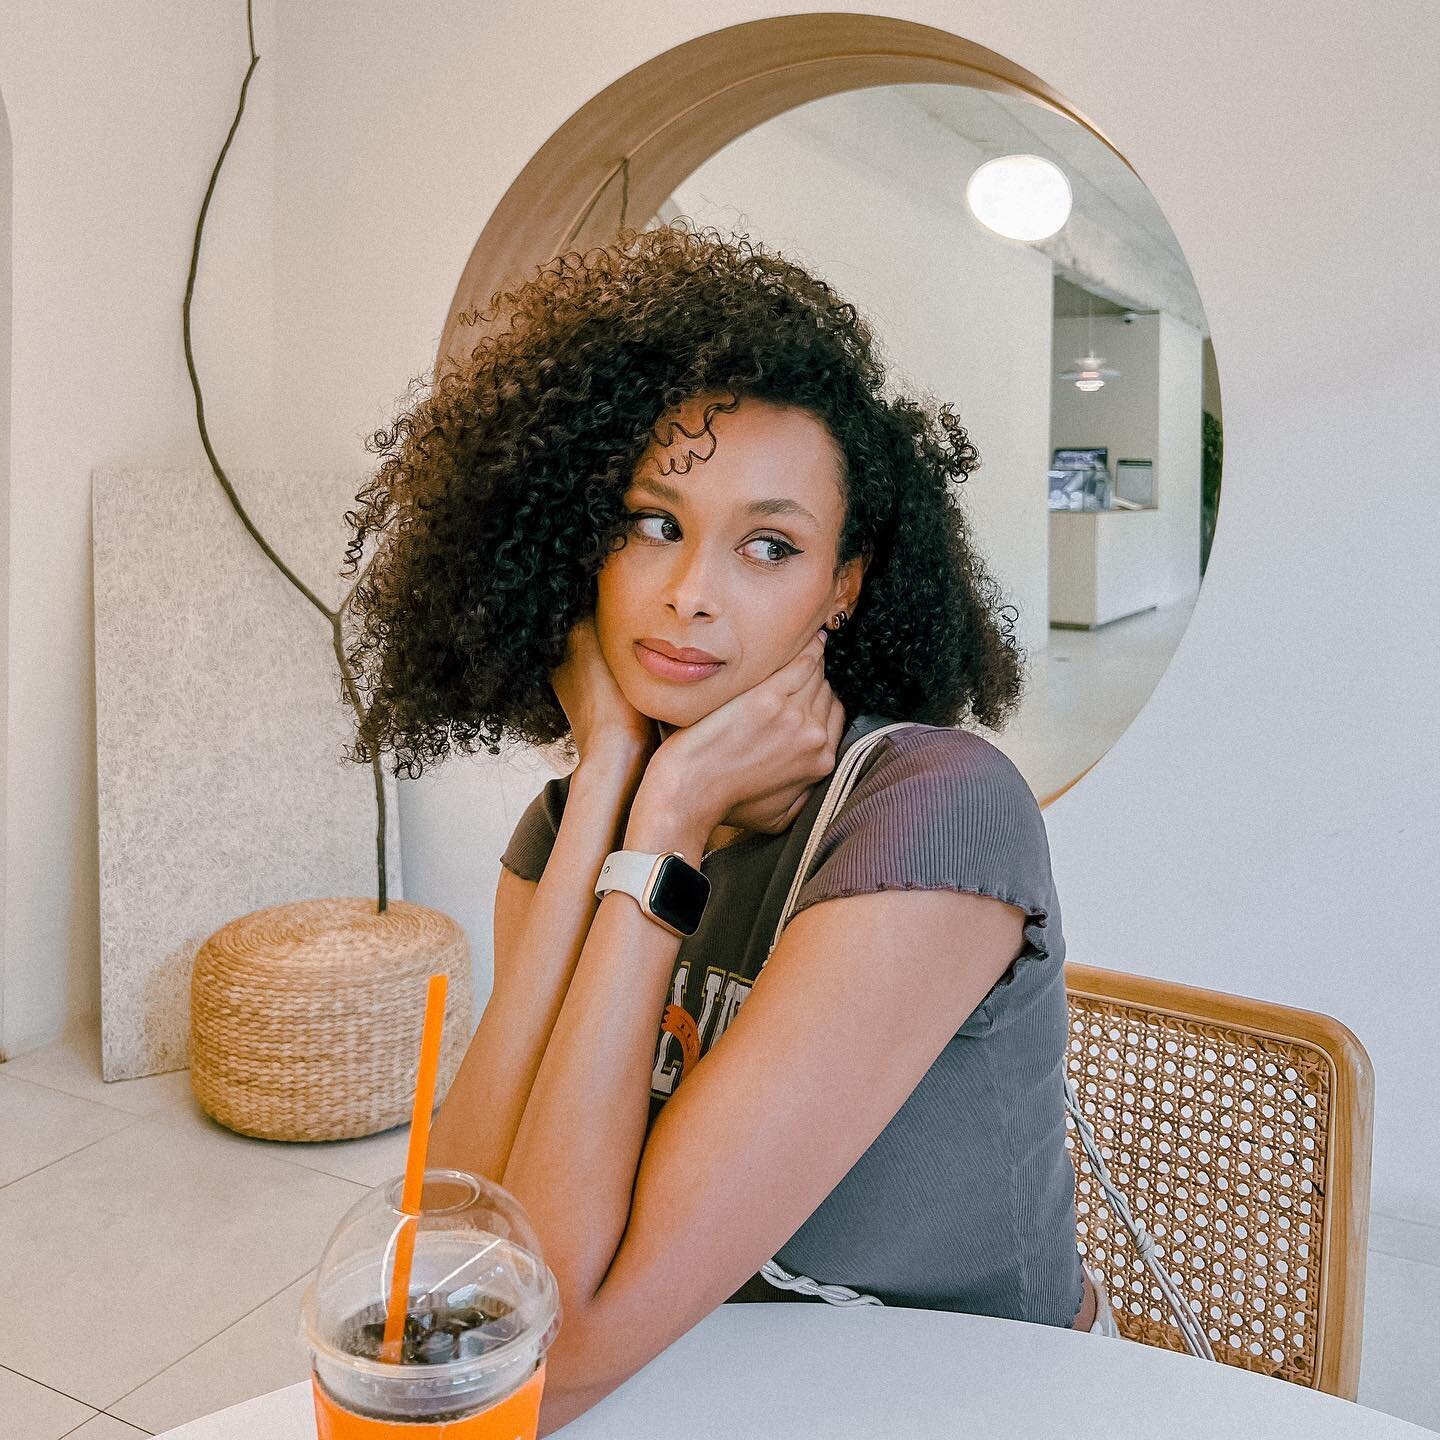 The moment when caf&eacute; dates become stressful... who can relate?
 
 
 
#curlyhairdontcare #curlyhairstyles #외국인모델 #흑인모델 #afrohairstyles